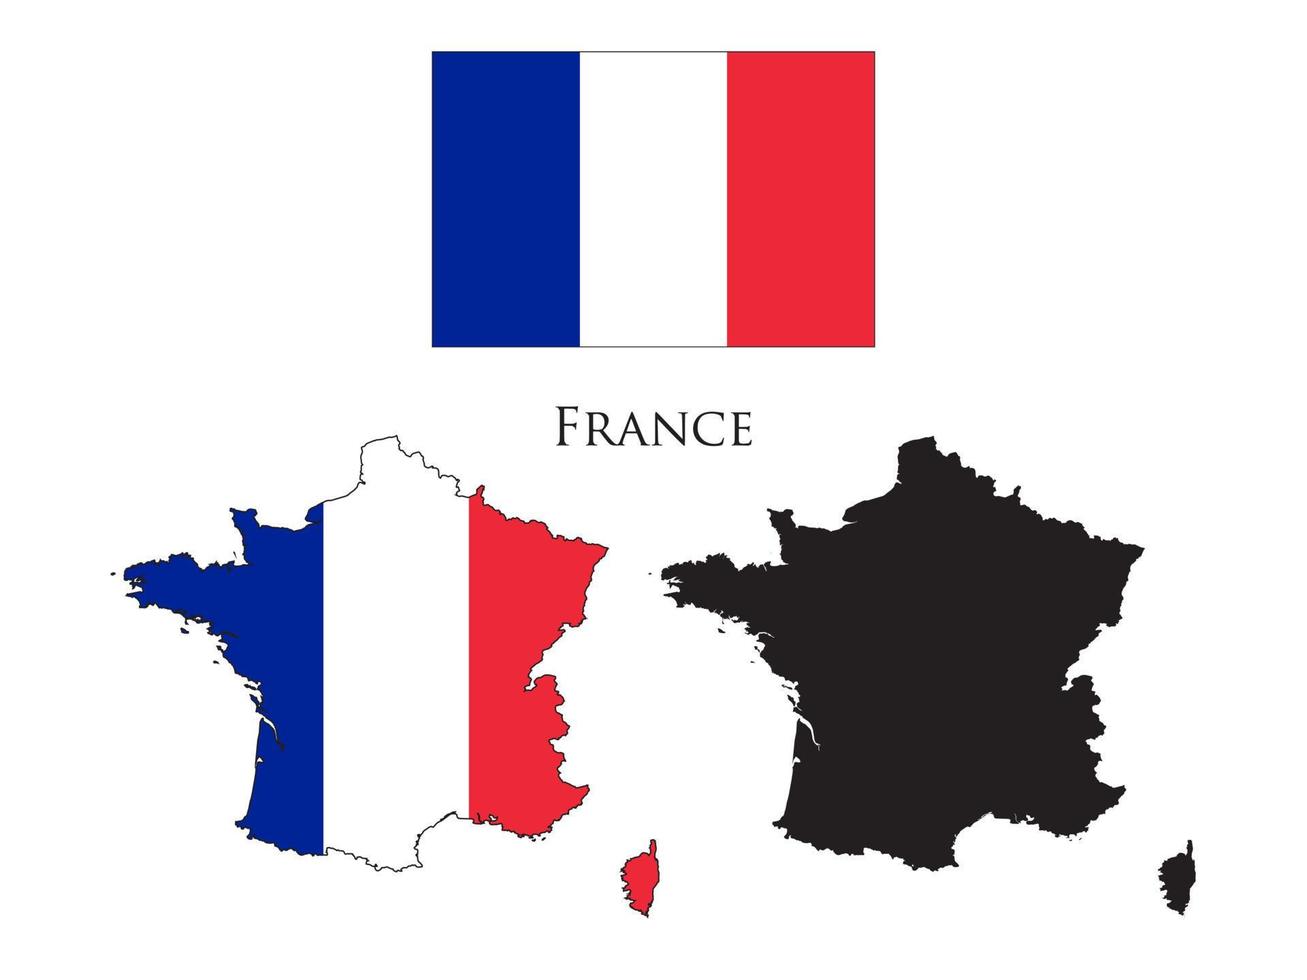 france flag and map illustration vector